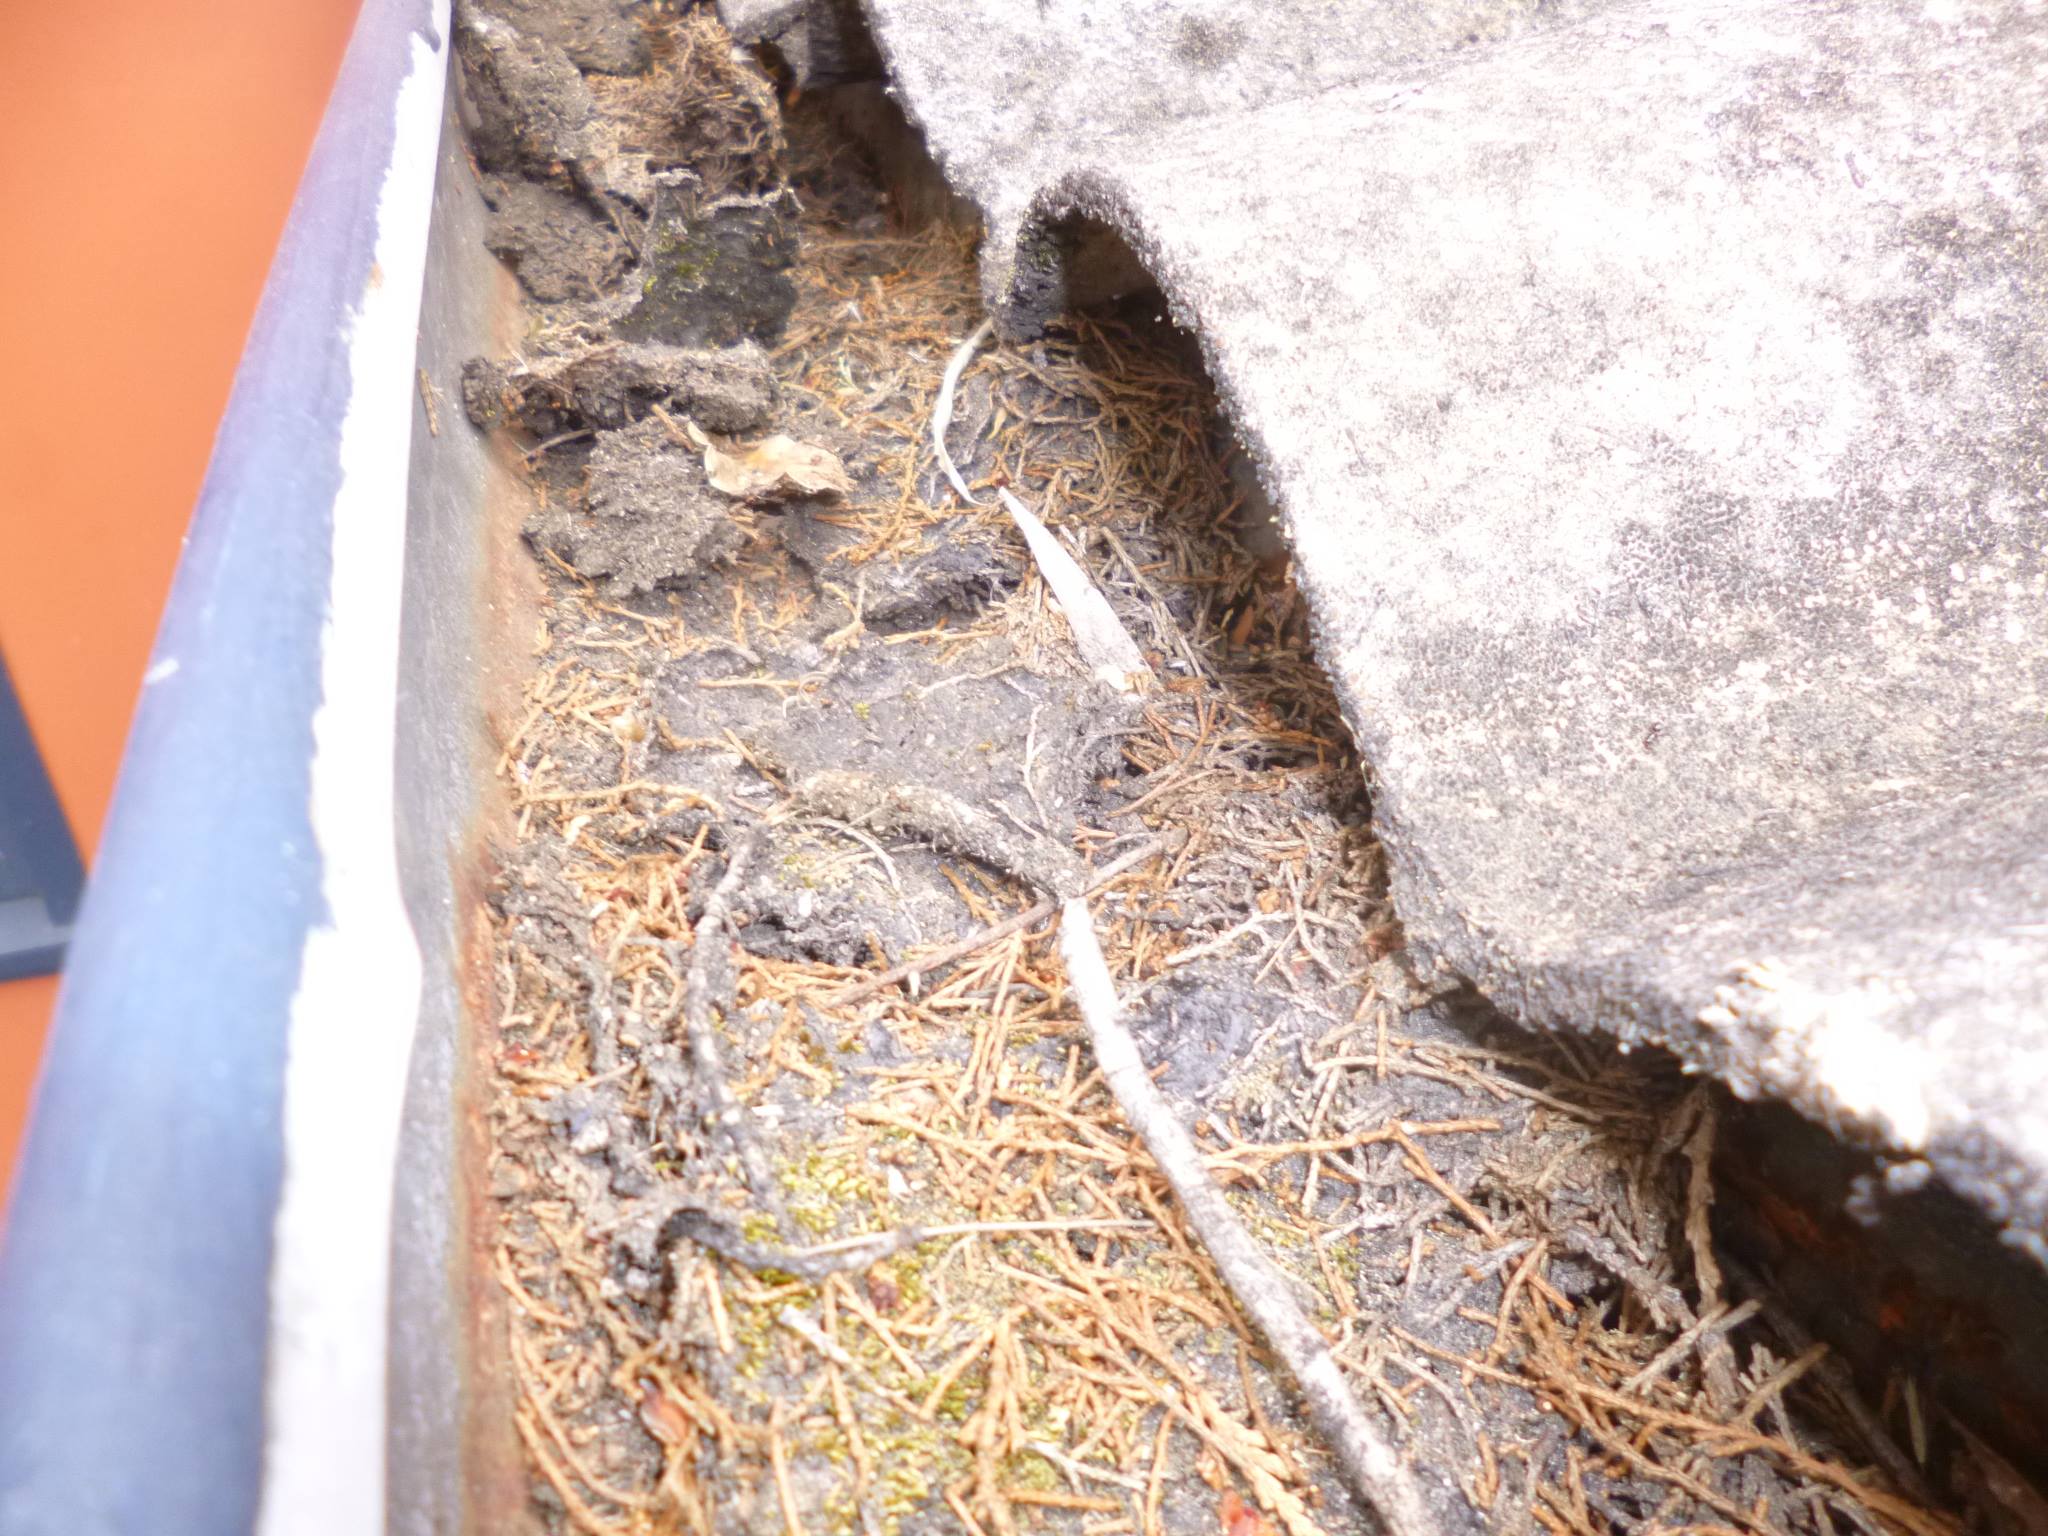 THE HIDDEN RISKS OF CLEANING GUTTERS ON ASBESTOS ROOFS